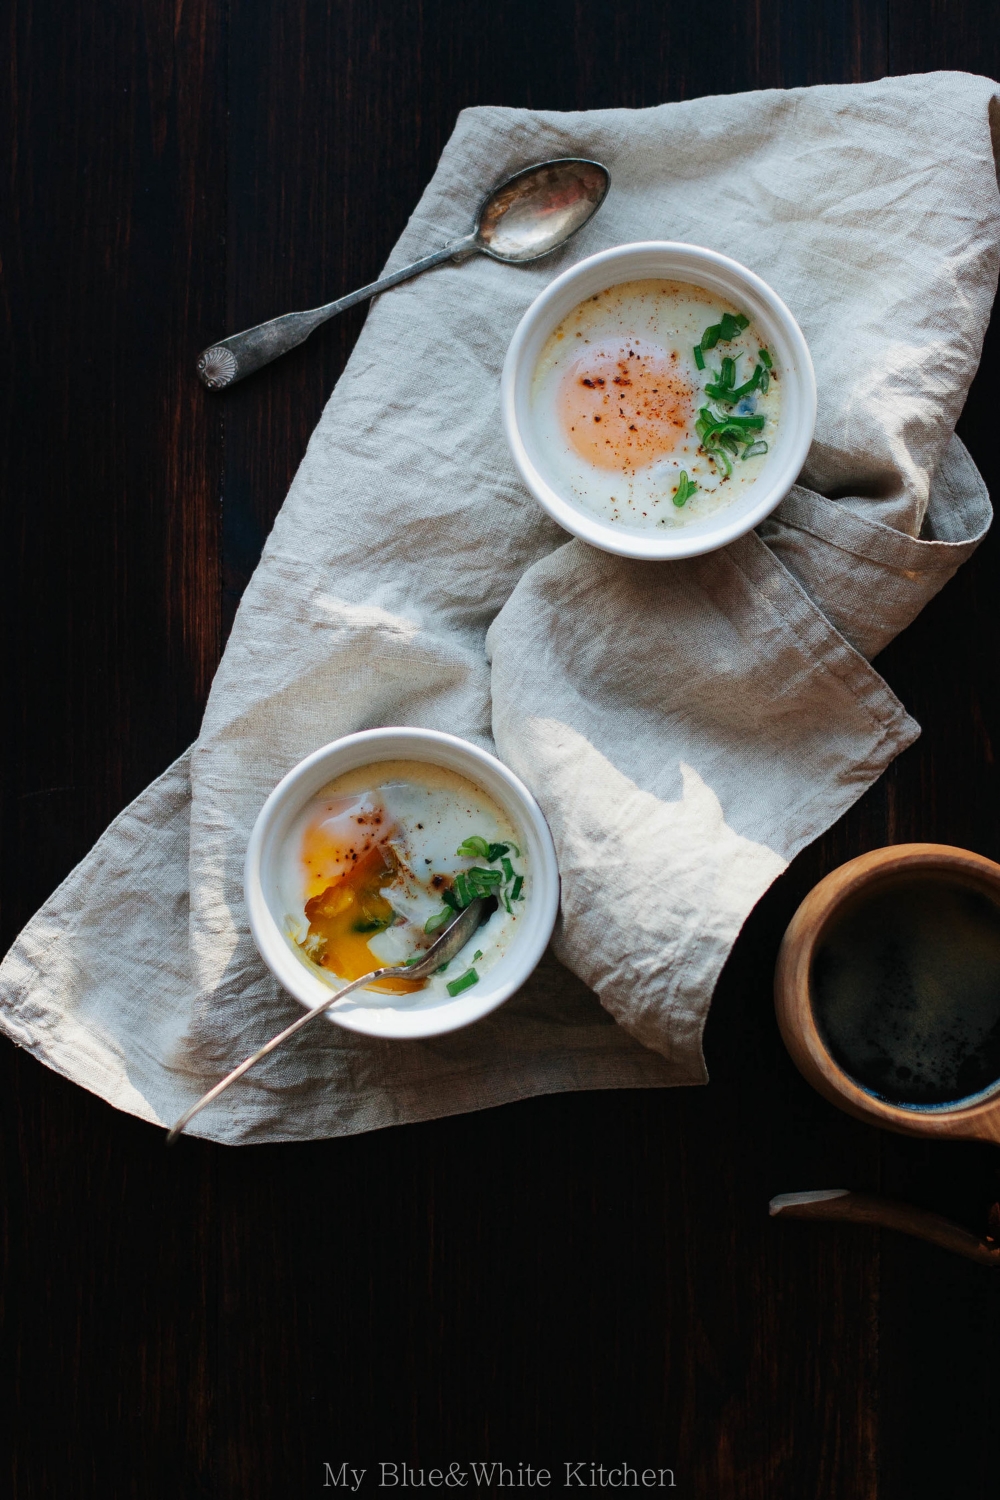 Oeufs en Cocotte with Spinach & Sun-Dried Tomatoes | My Blue&White Kitchen